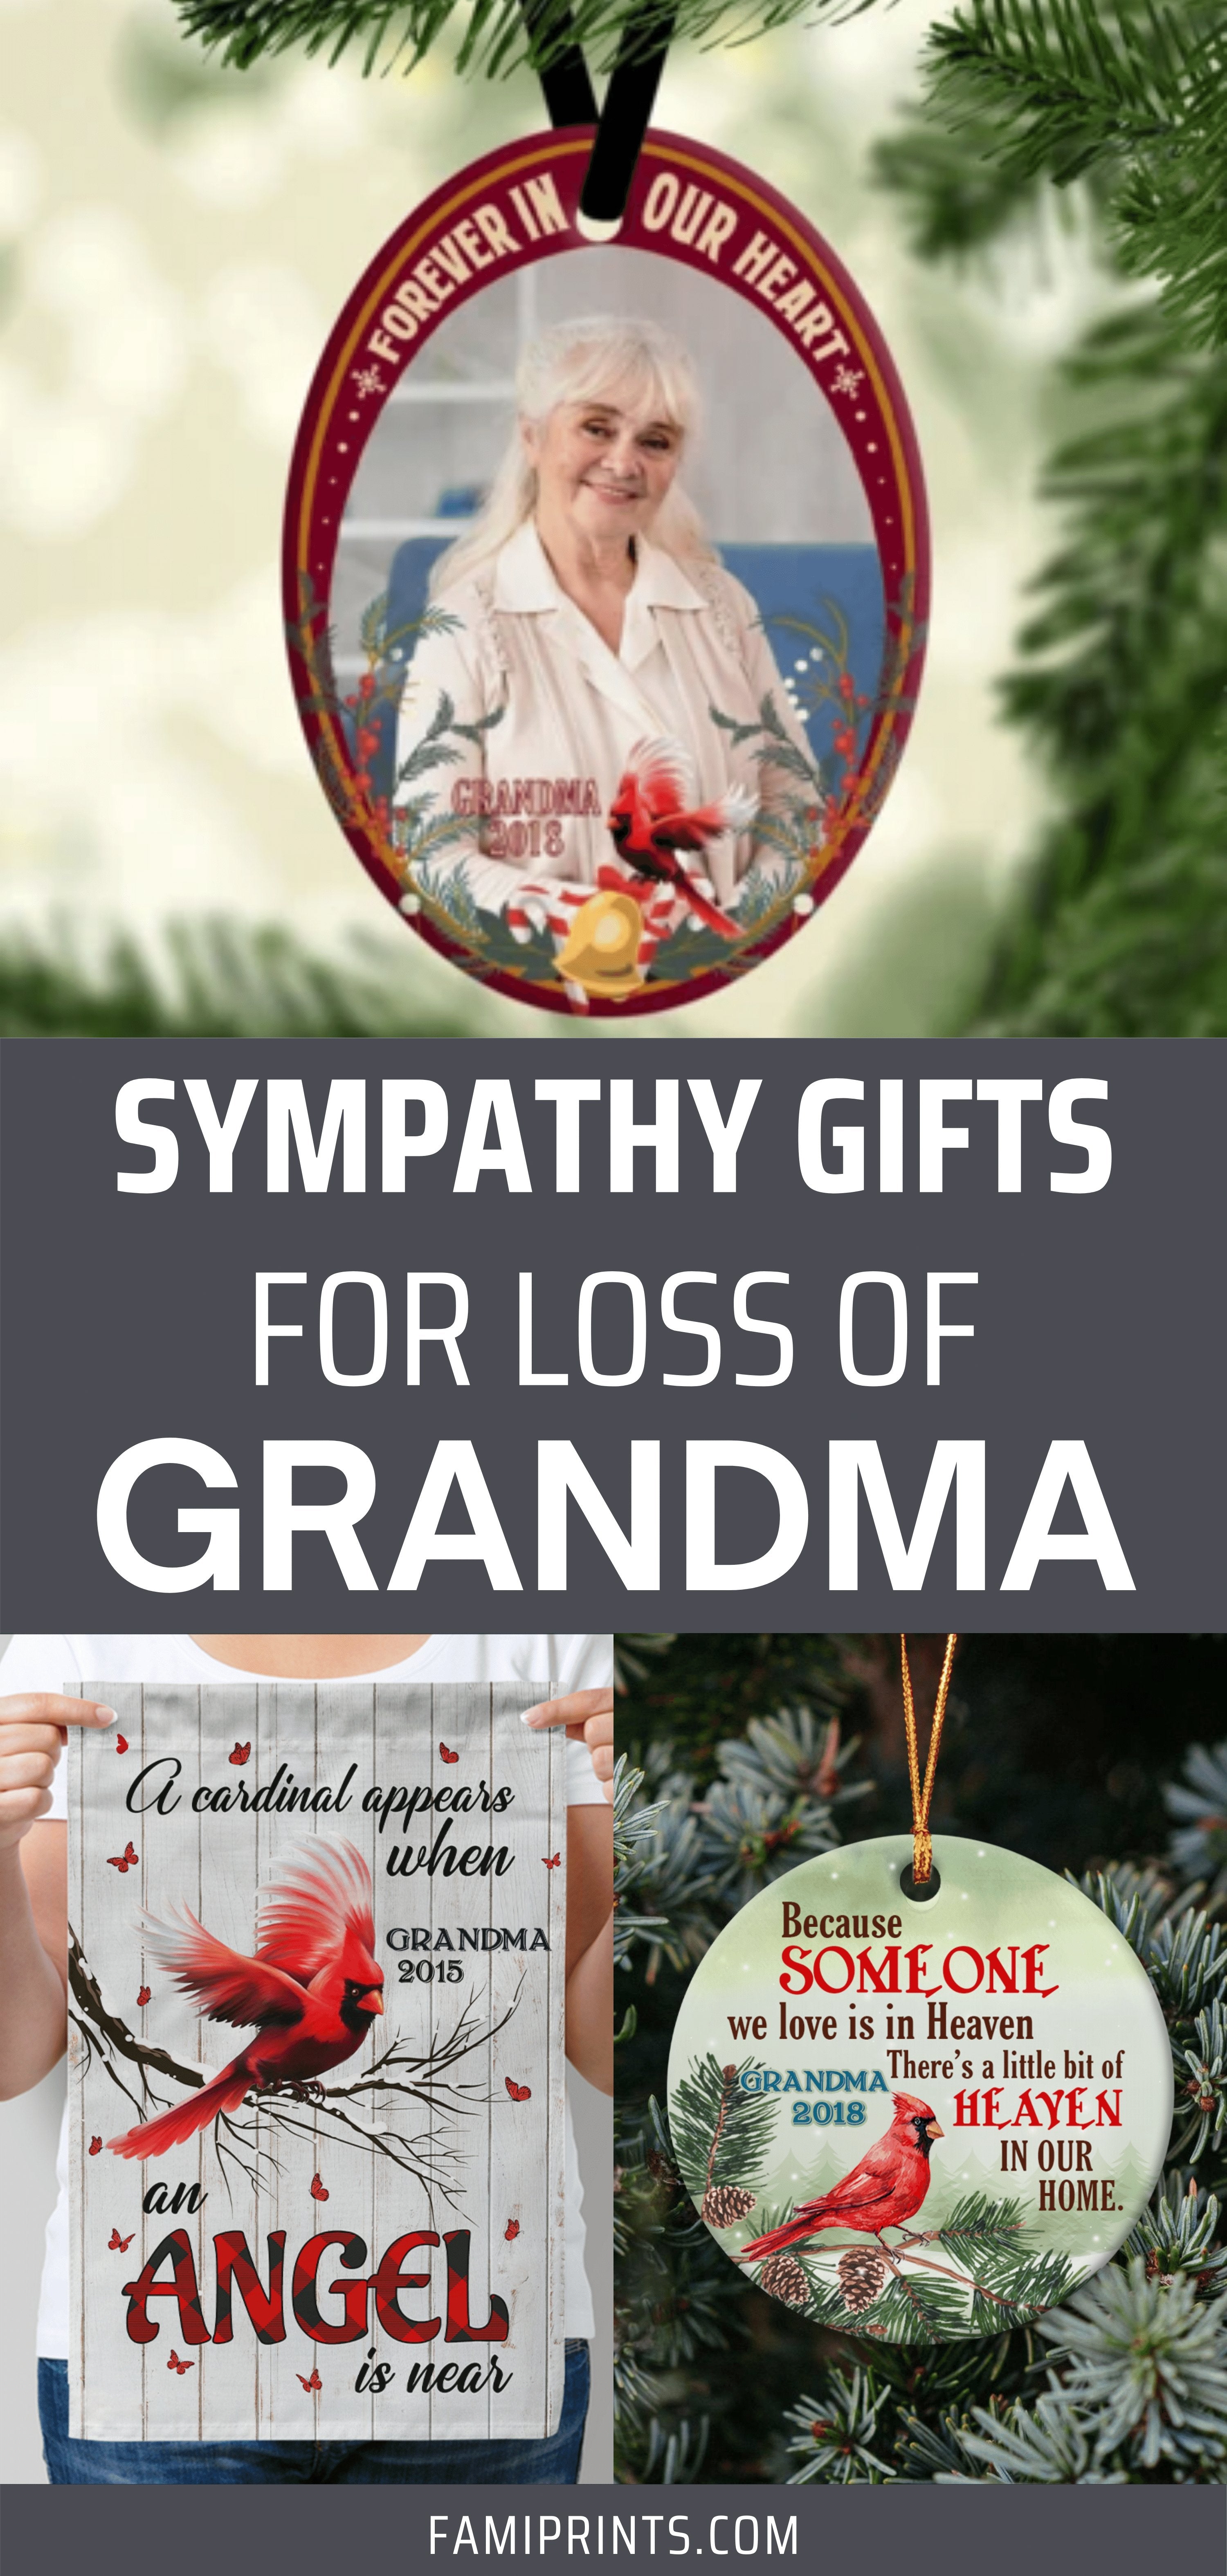 Sympathy Gifts for Loss of Grandma | FamiPrints | Trending Personalized Family Gifts